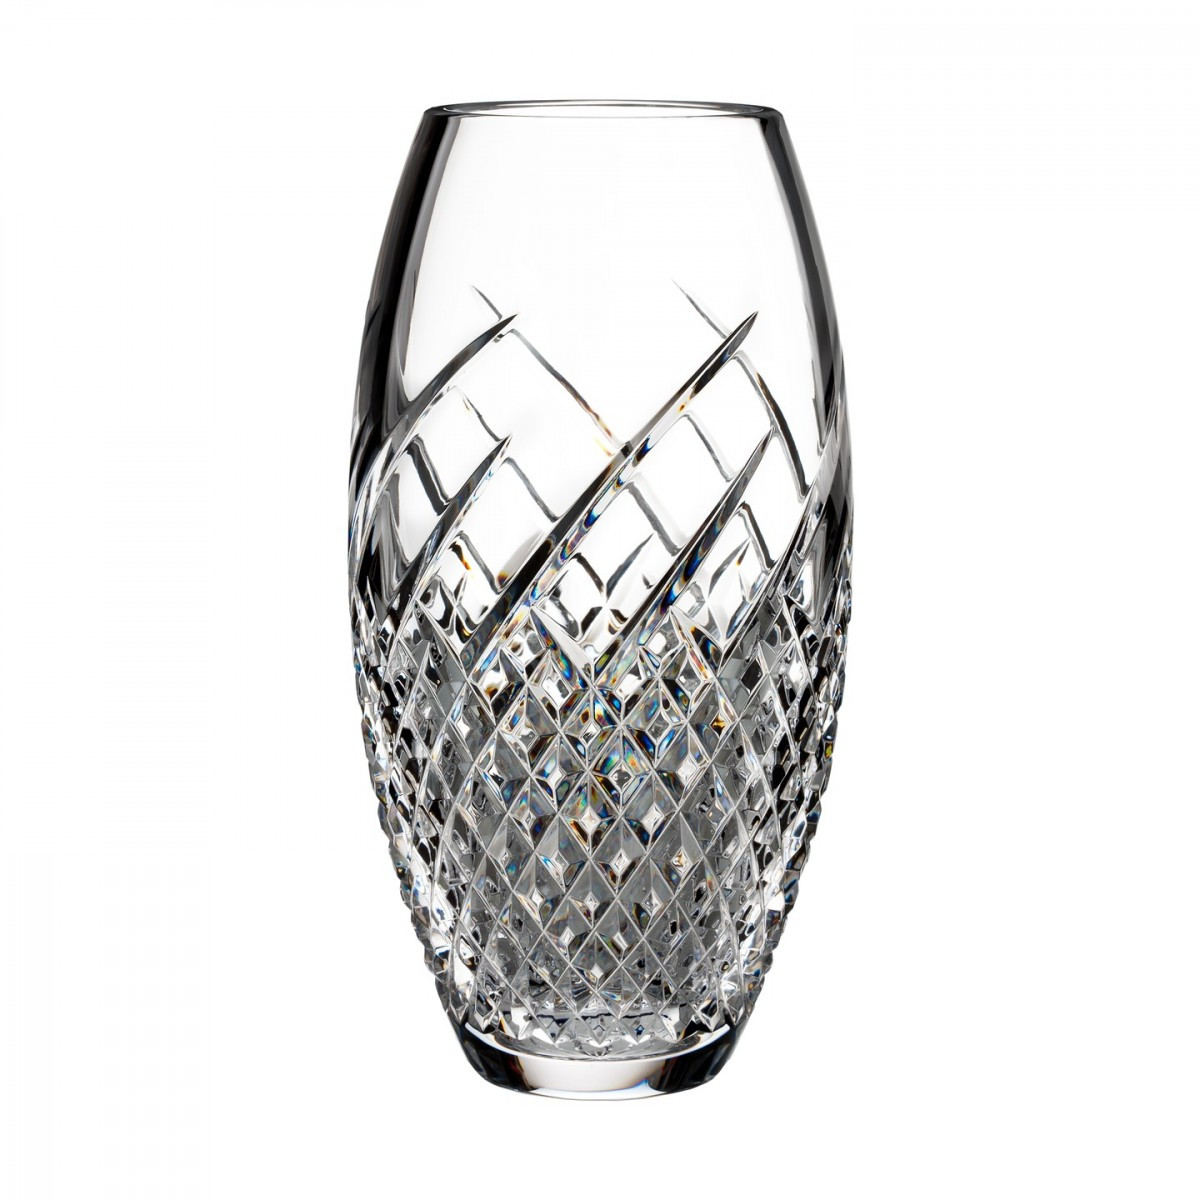 marquis by waterford markham vase of wild atlantic way 10in vase house of waterford crystal us throughout wild atlantic way 10in vase